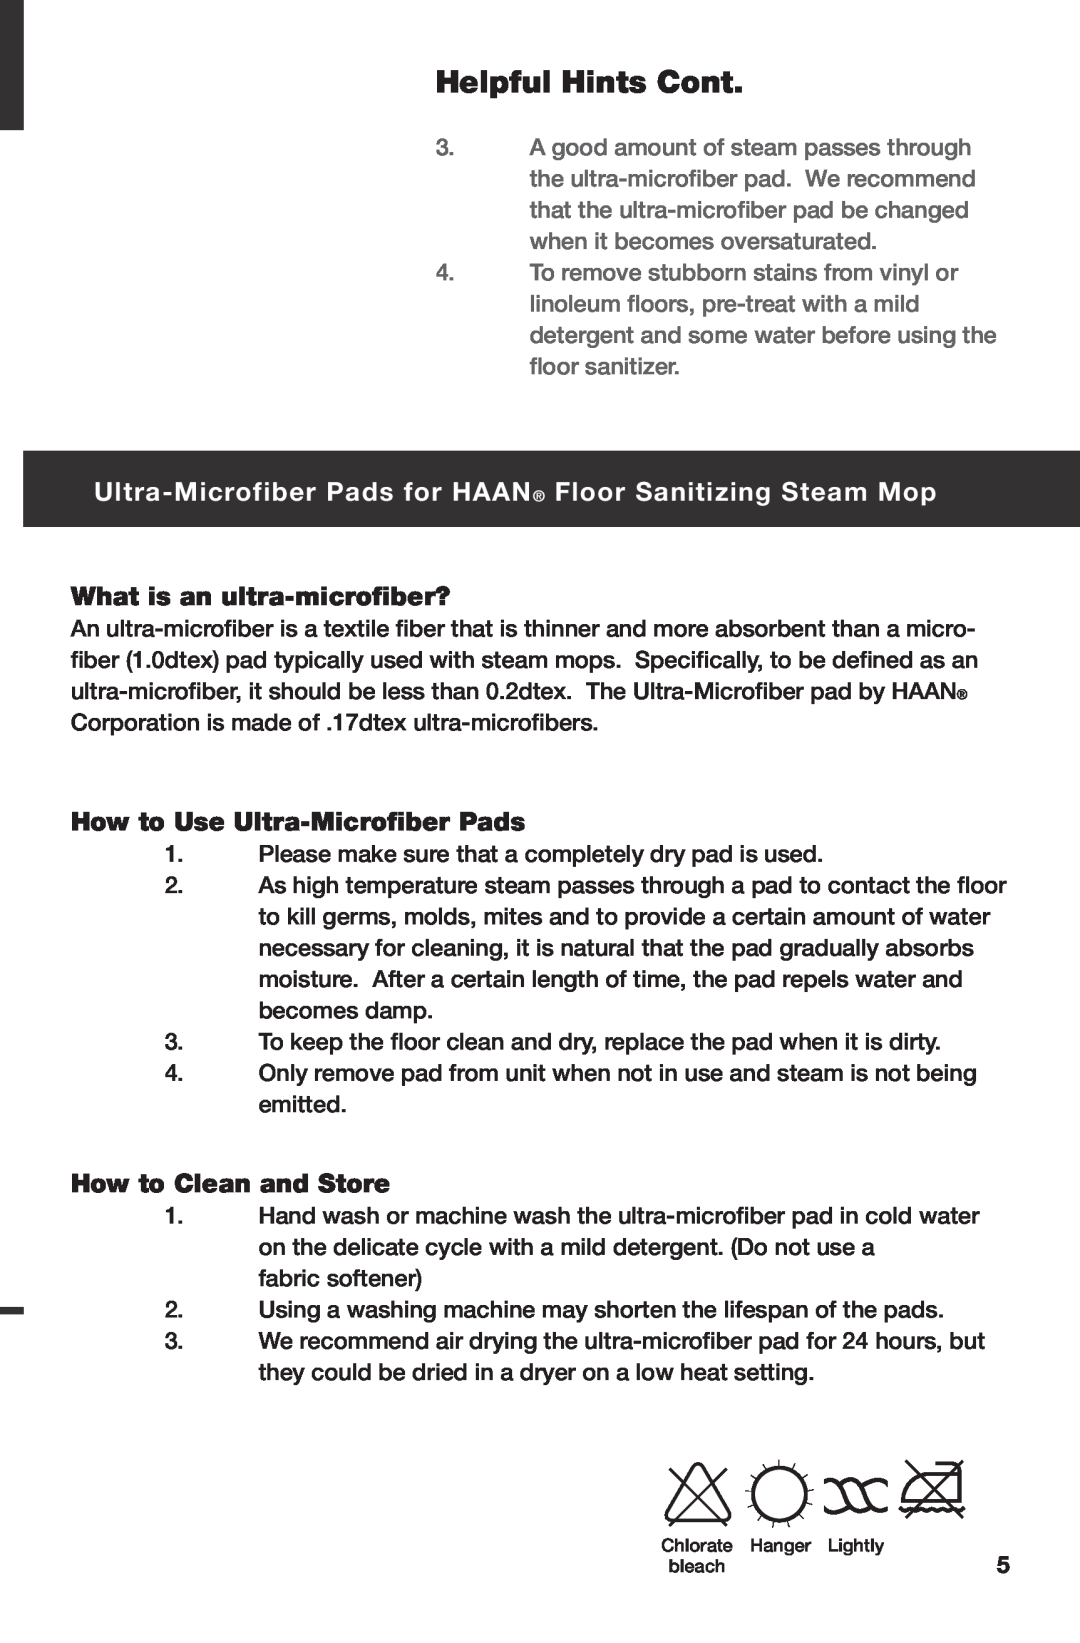 Haan SI-35 Helpful Hints Cont, What is an ultra-microfiber?, How to Use Ultra-MicrofiberPads, How to Clean and Store 